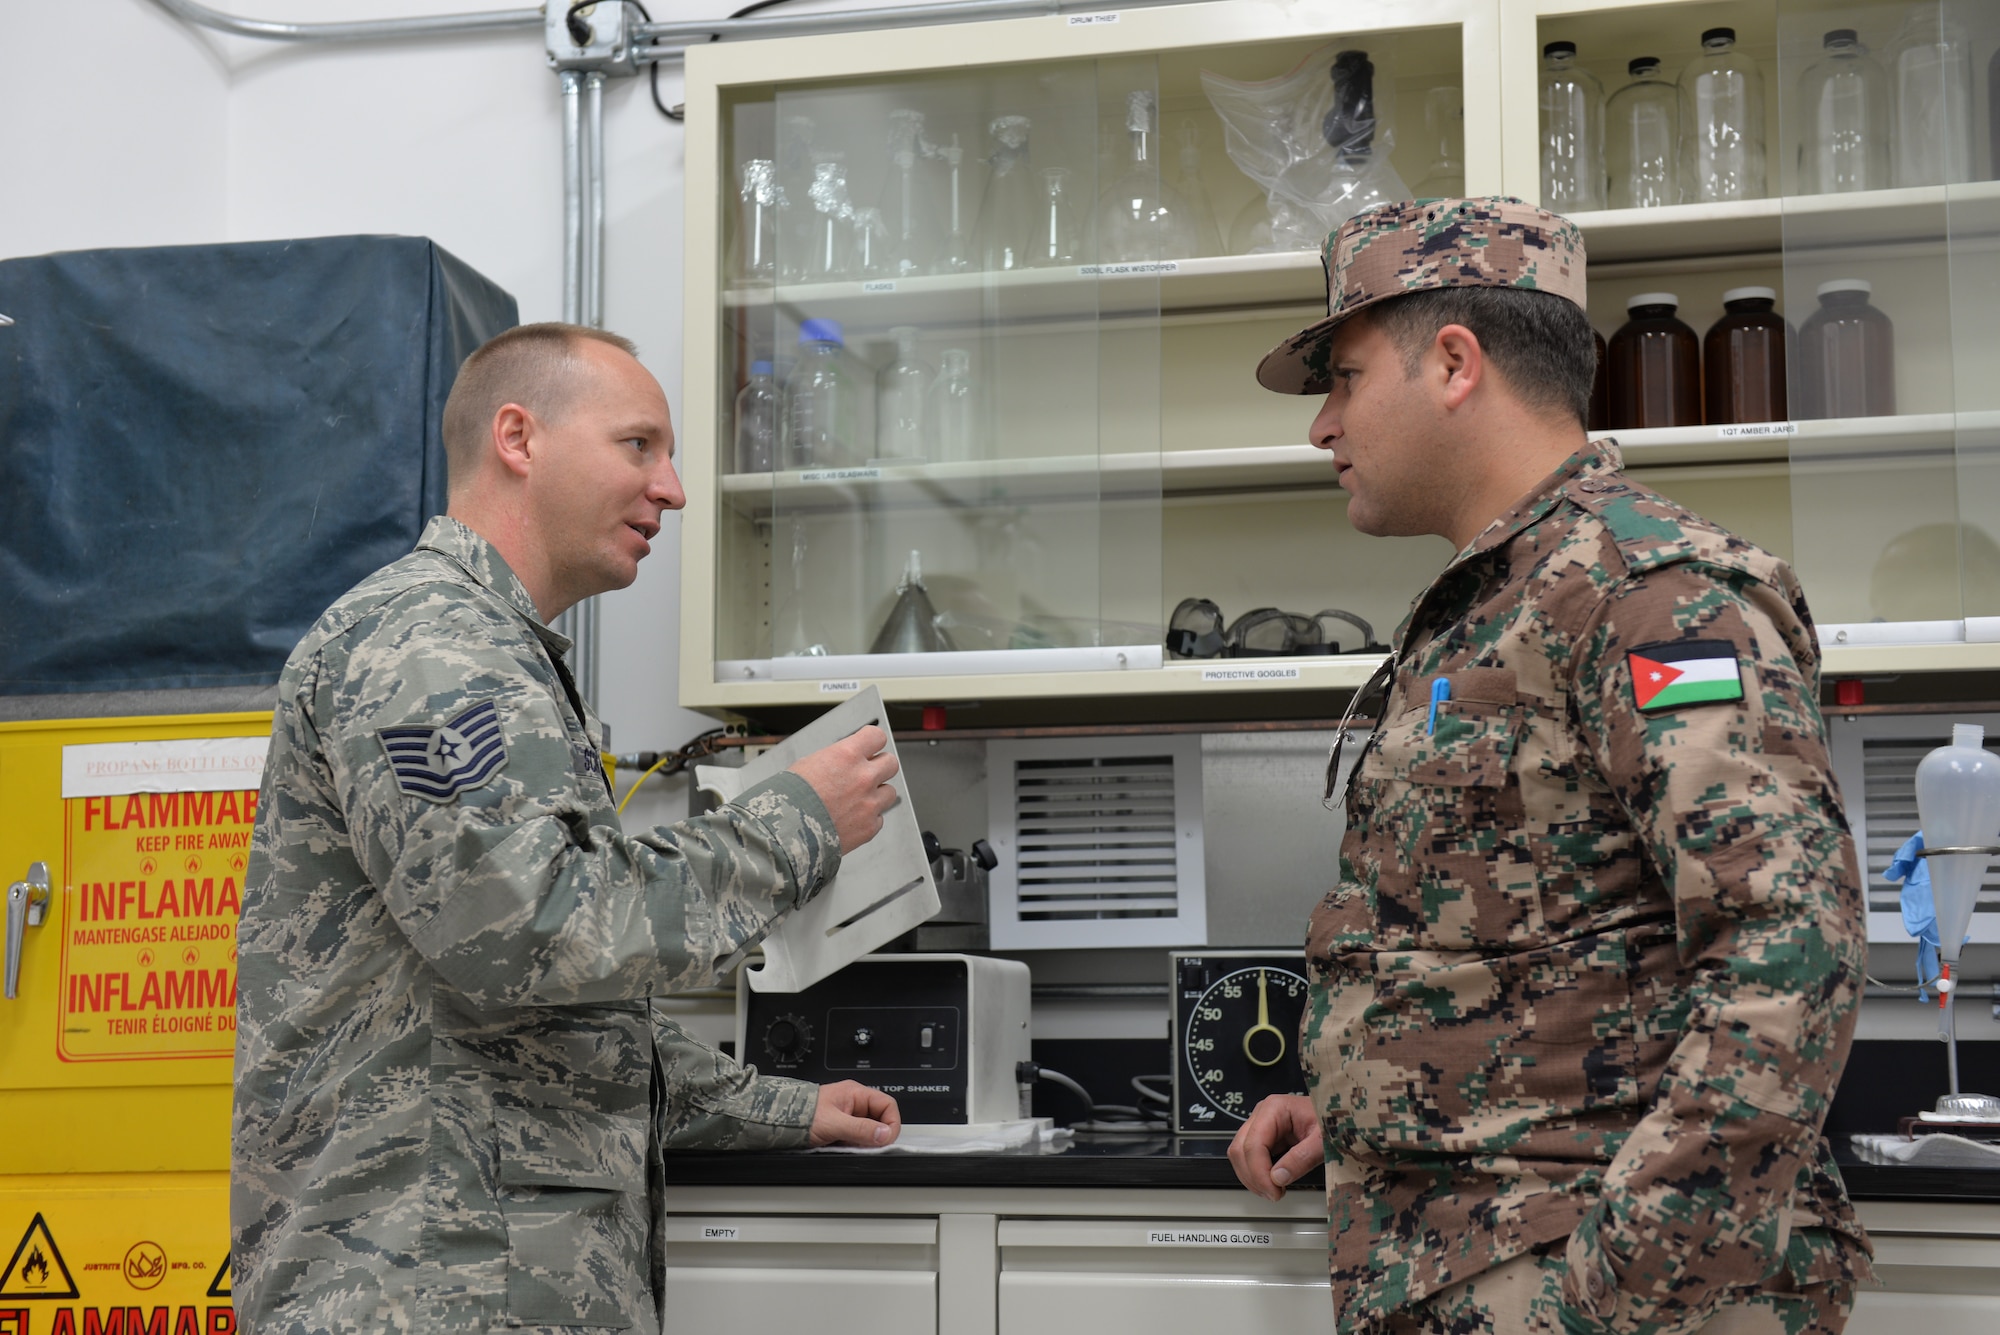 Two Airmen discussing fuel lab operations